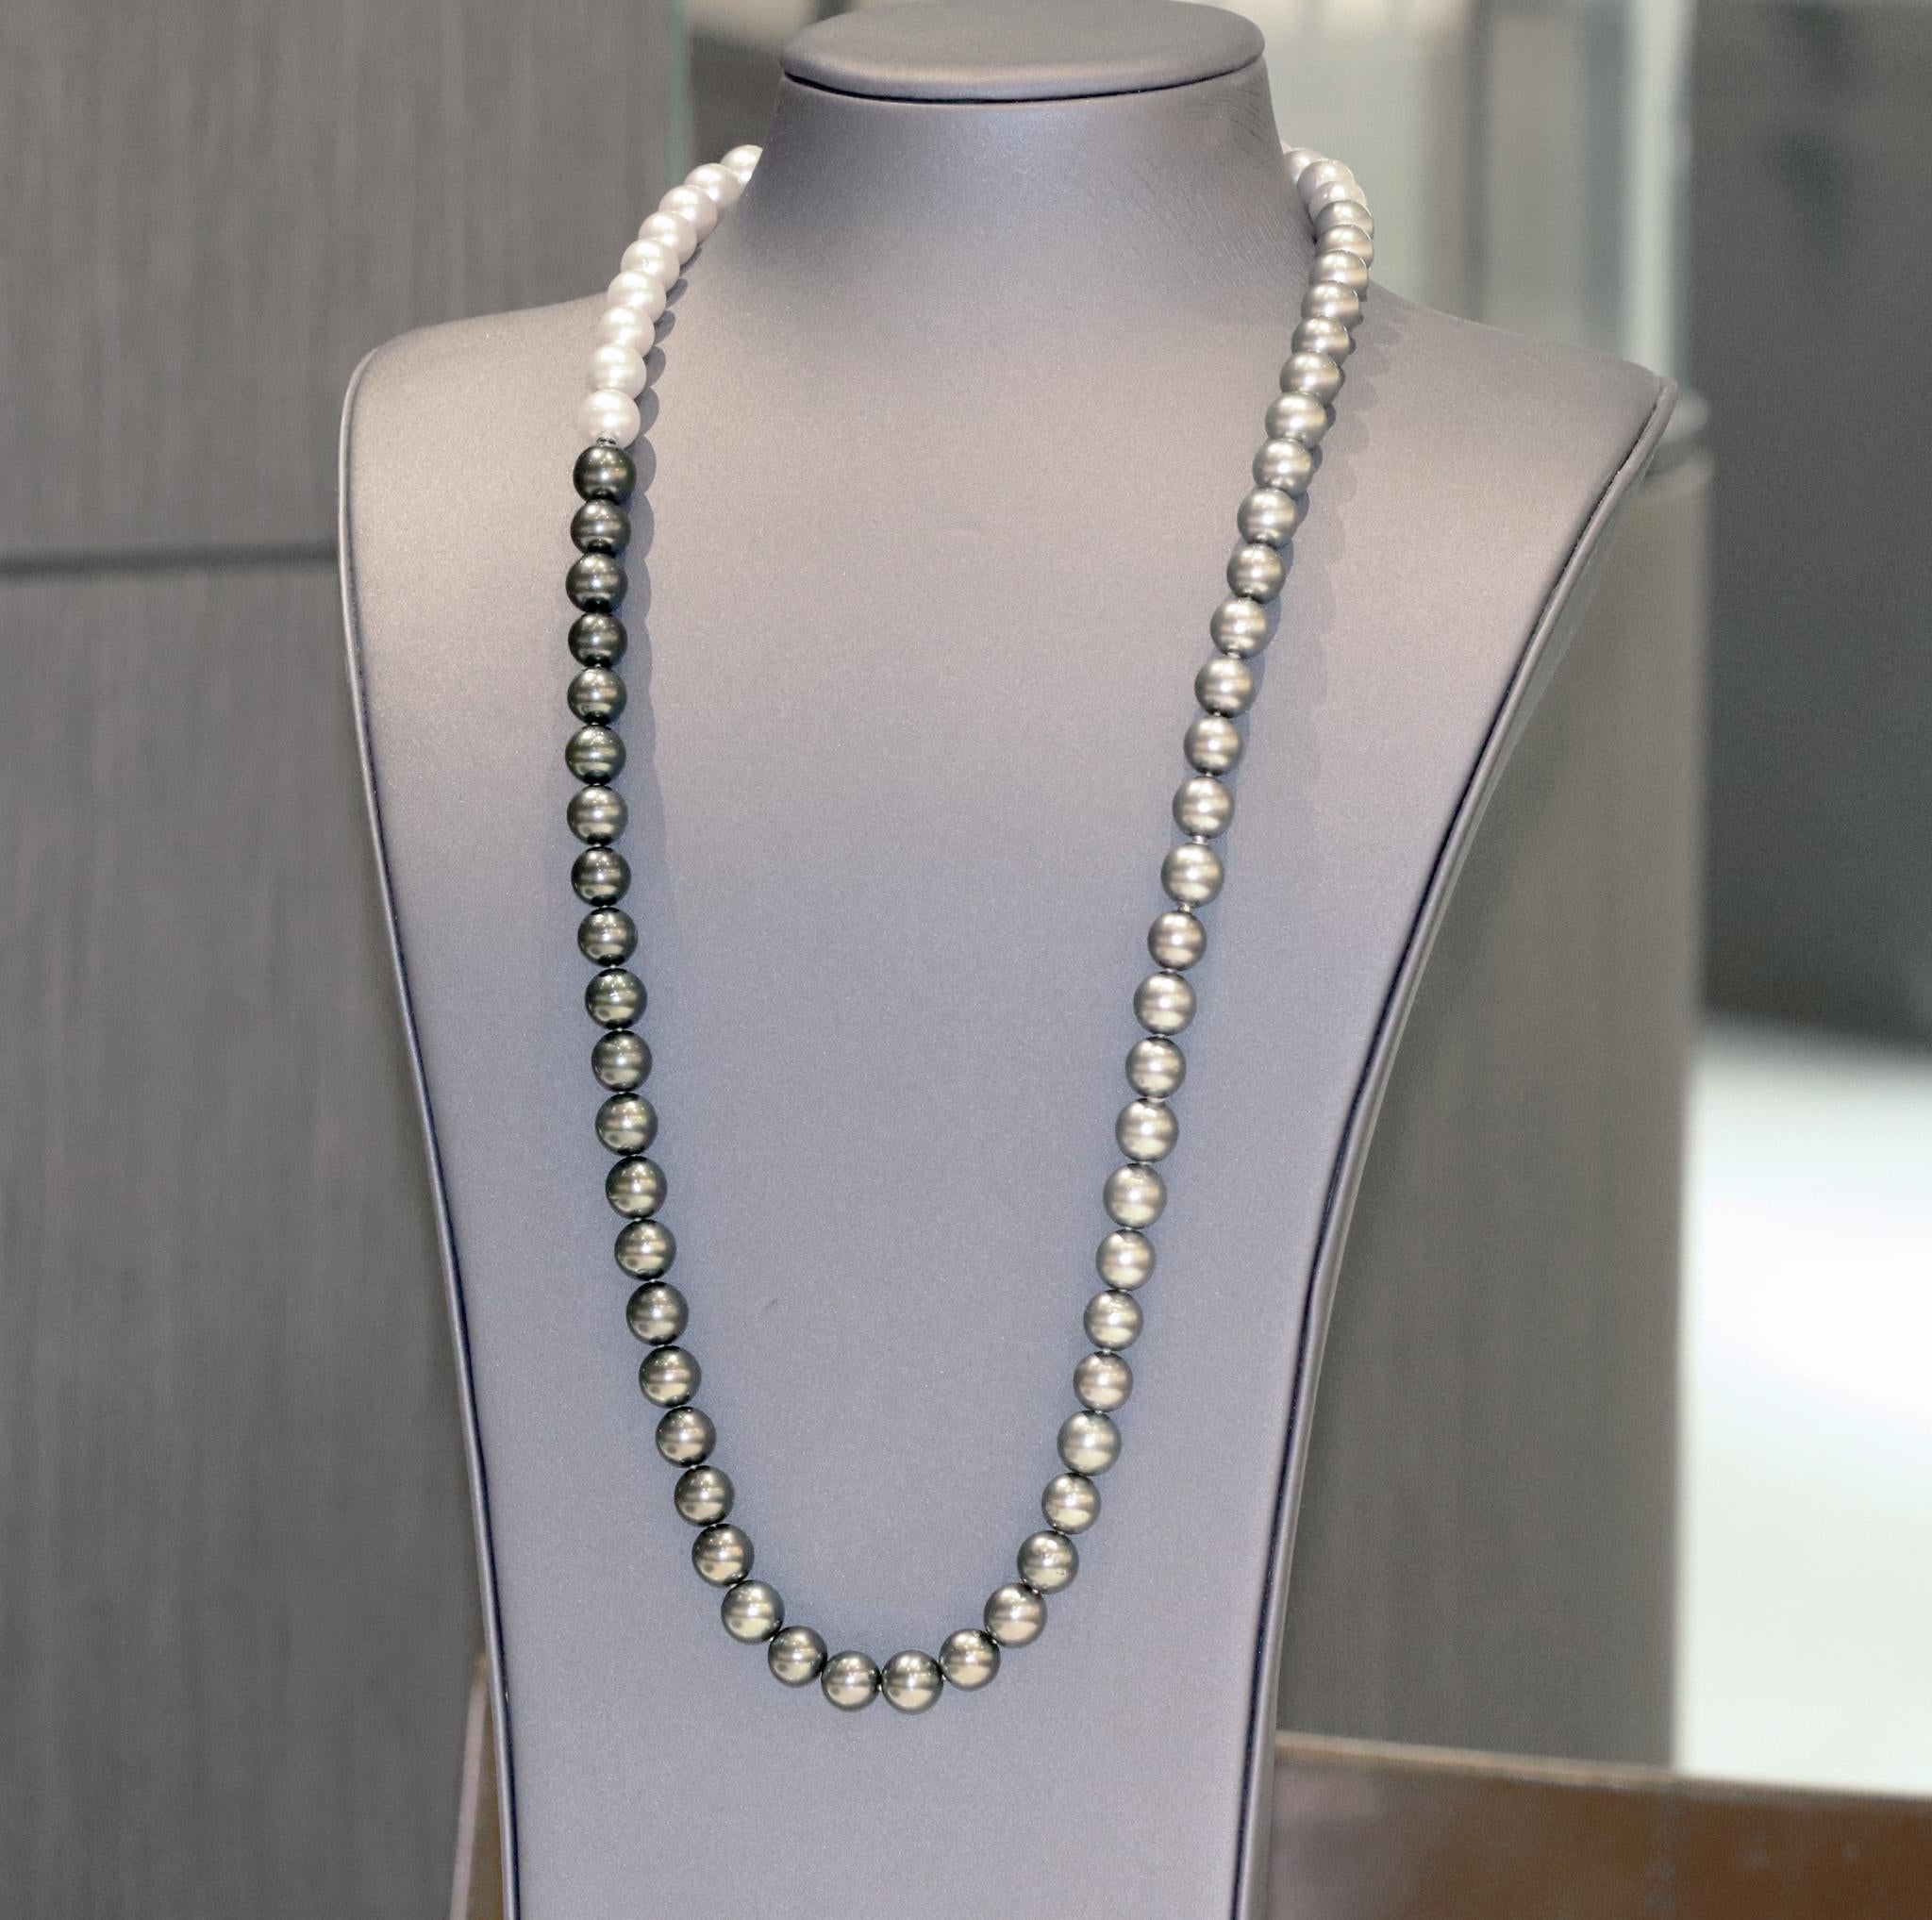 Women's Atelier Zobel Ombré Tahitian and South Sea Pearl Multilength Necklaces